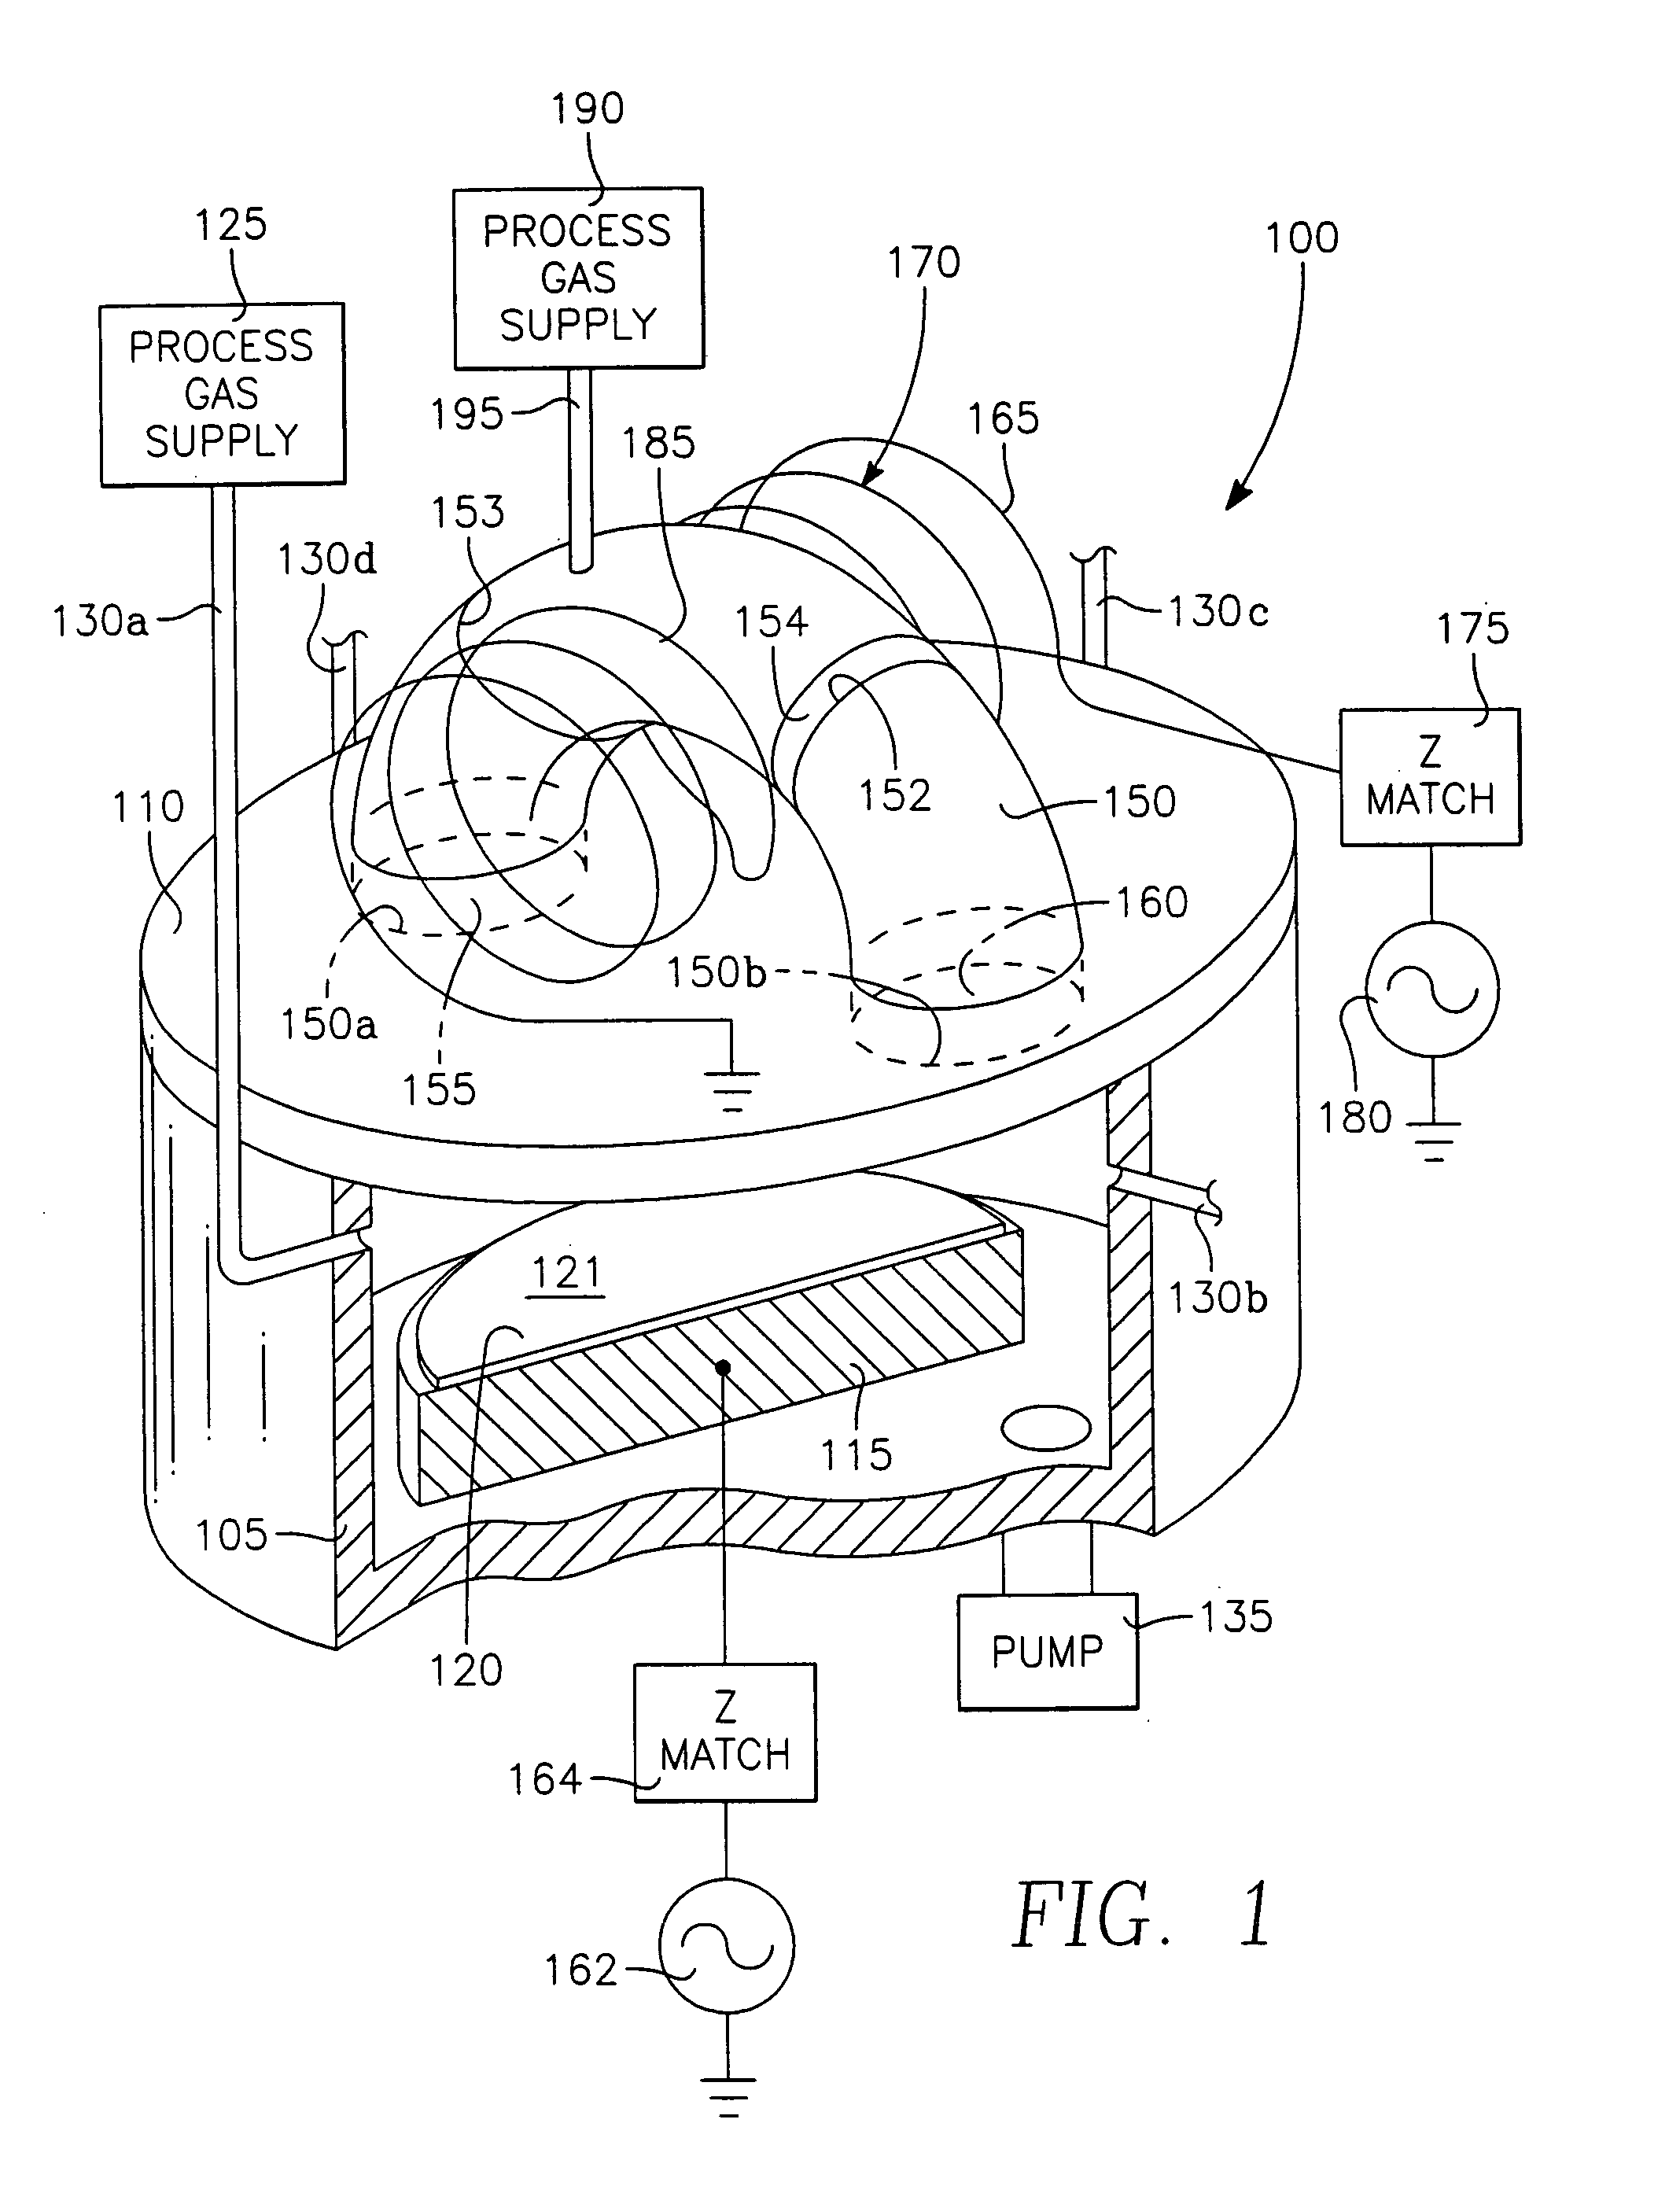 Plasma immersion ion implantation system including an inductively coupled plasma source having low dissociation and low minimum plasma voltage